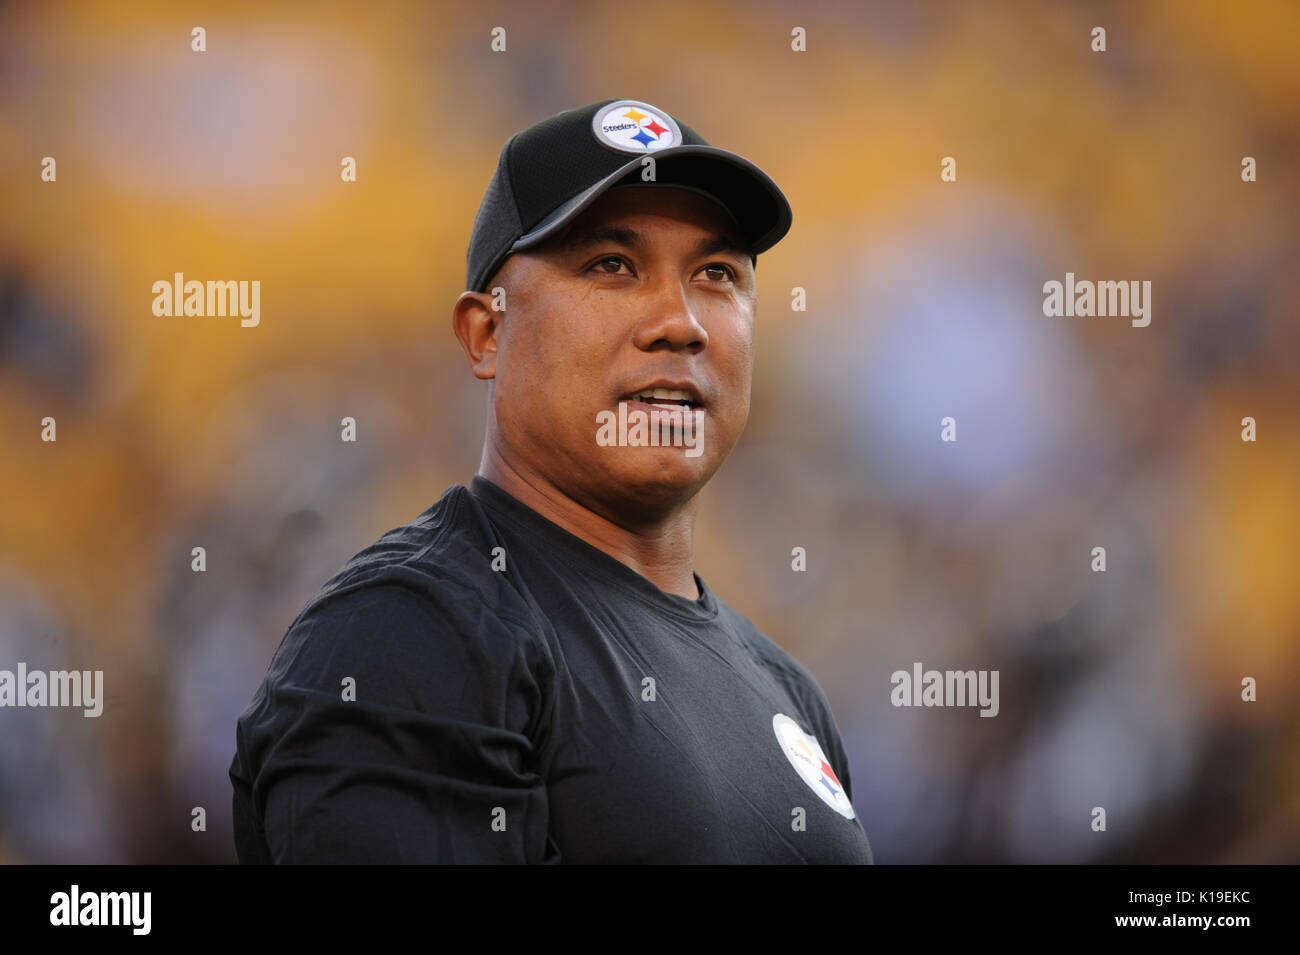 Pittsburgh, USA. 26th August, 2017. August 26th, 2017: Hines Ward during the Indianapolis Colts vs Pittsburgh Steelers game at Heinz Field in Pittsburgh, PA. Jason Pohuski/CSM/Alamy Live News Stock Photo